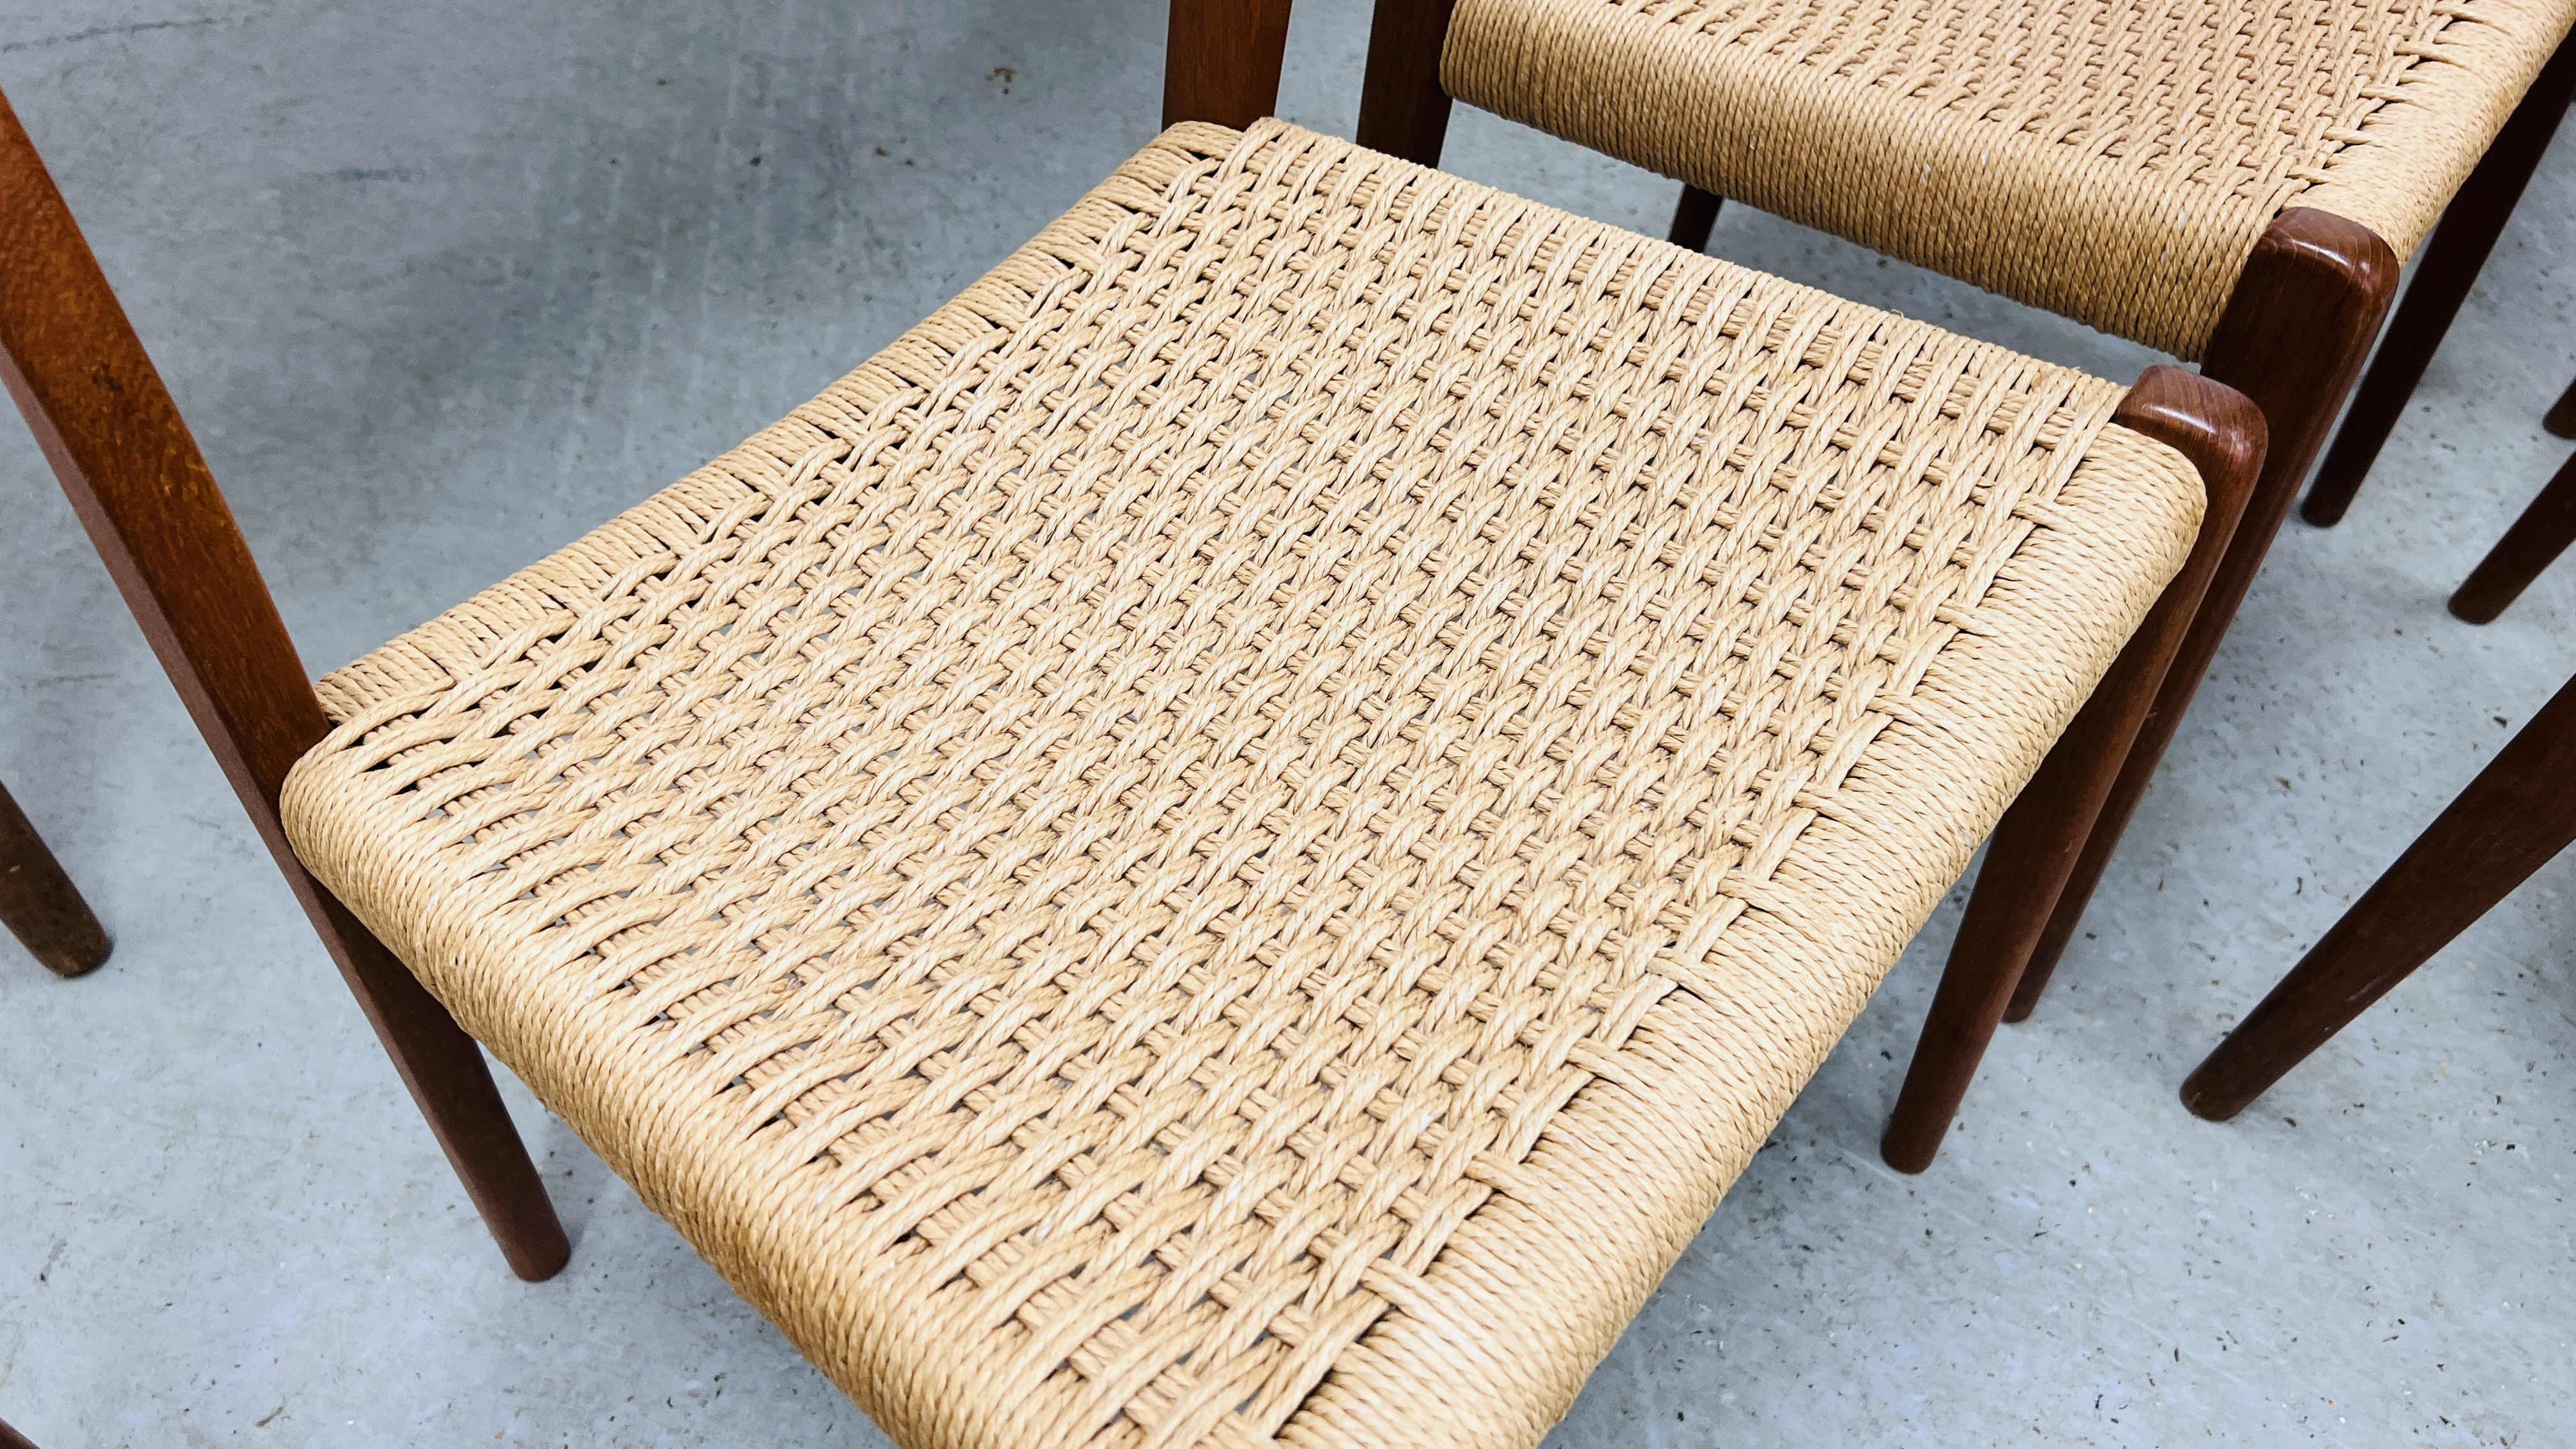 SET OF EIGHT J MOLLER DANISH TEAK DINING CHAIRS WITH WOVEN SISAL SEATS ALONG WITH A DRAWER LEAF - Image 28 of 48